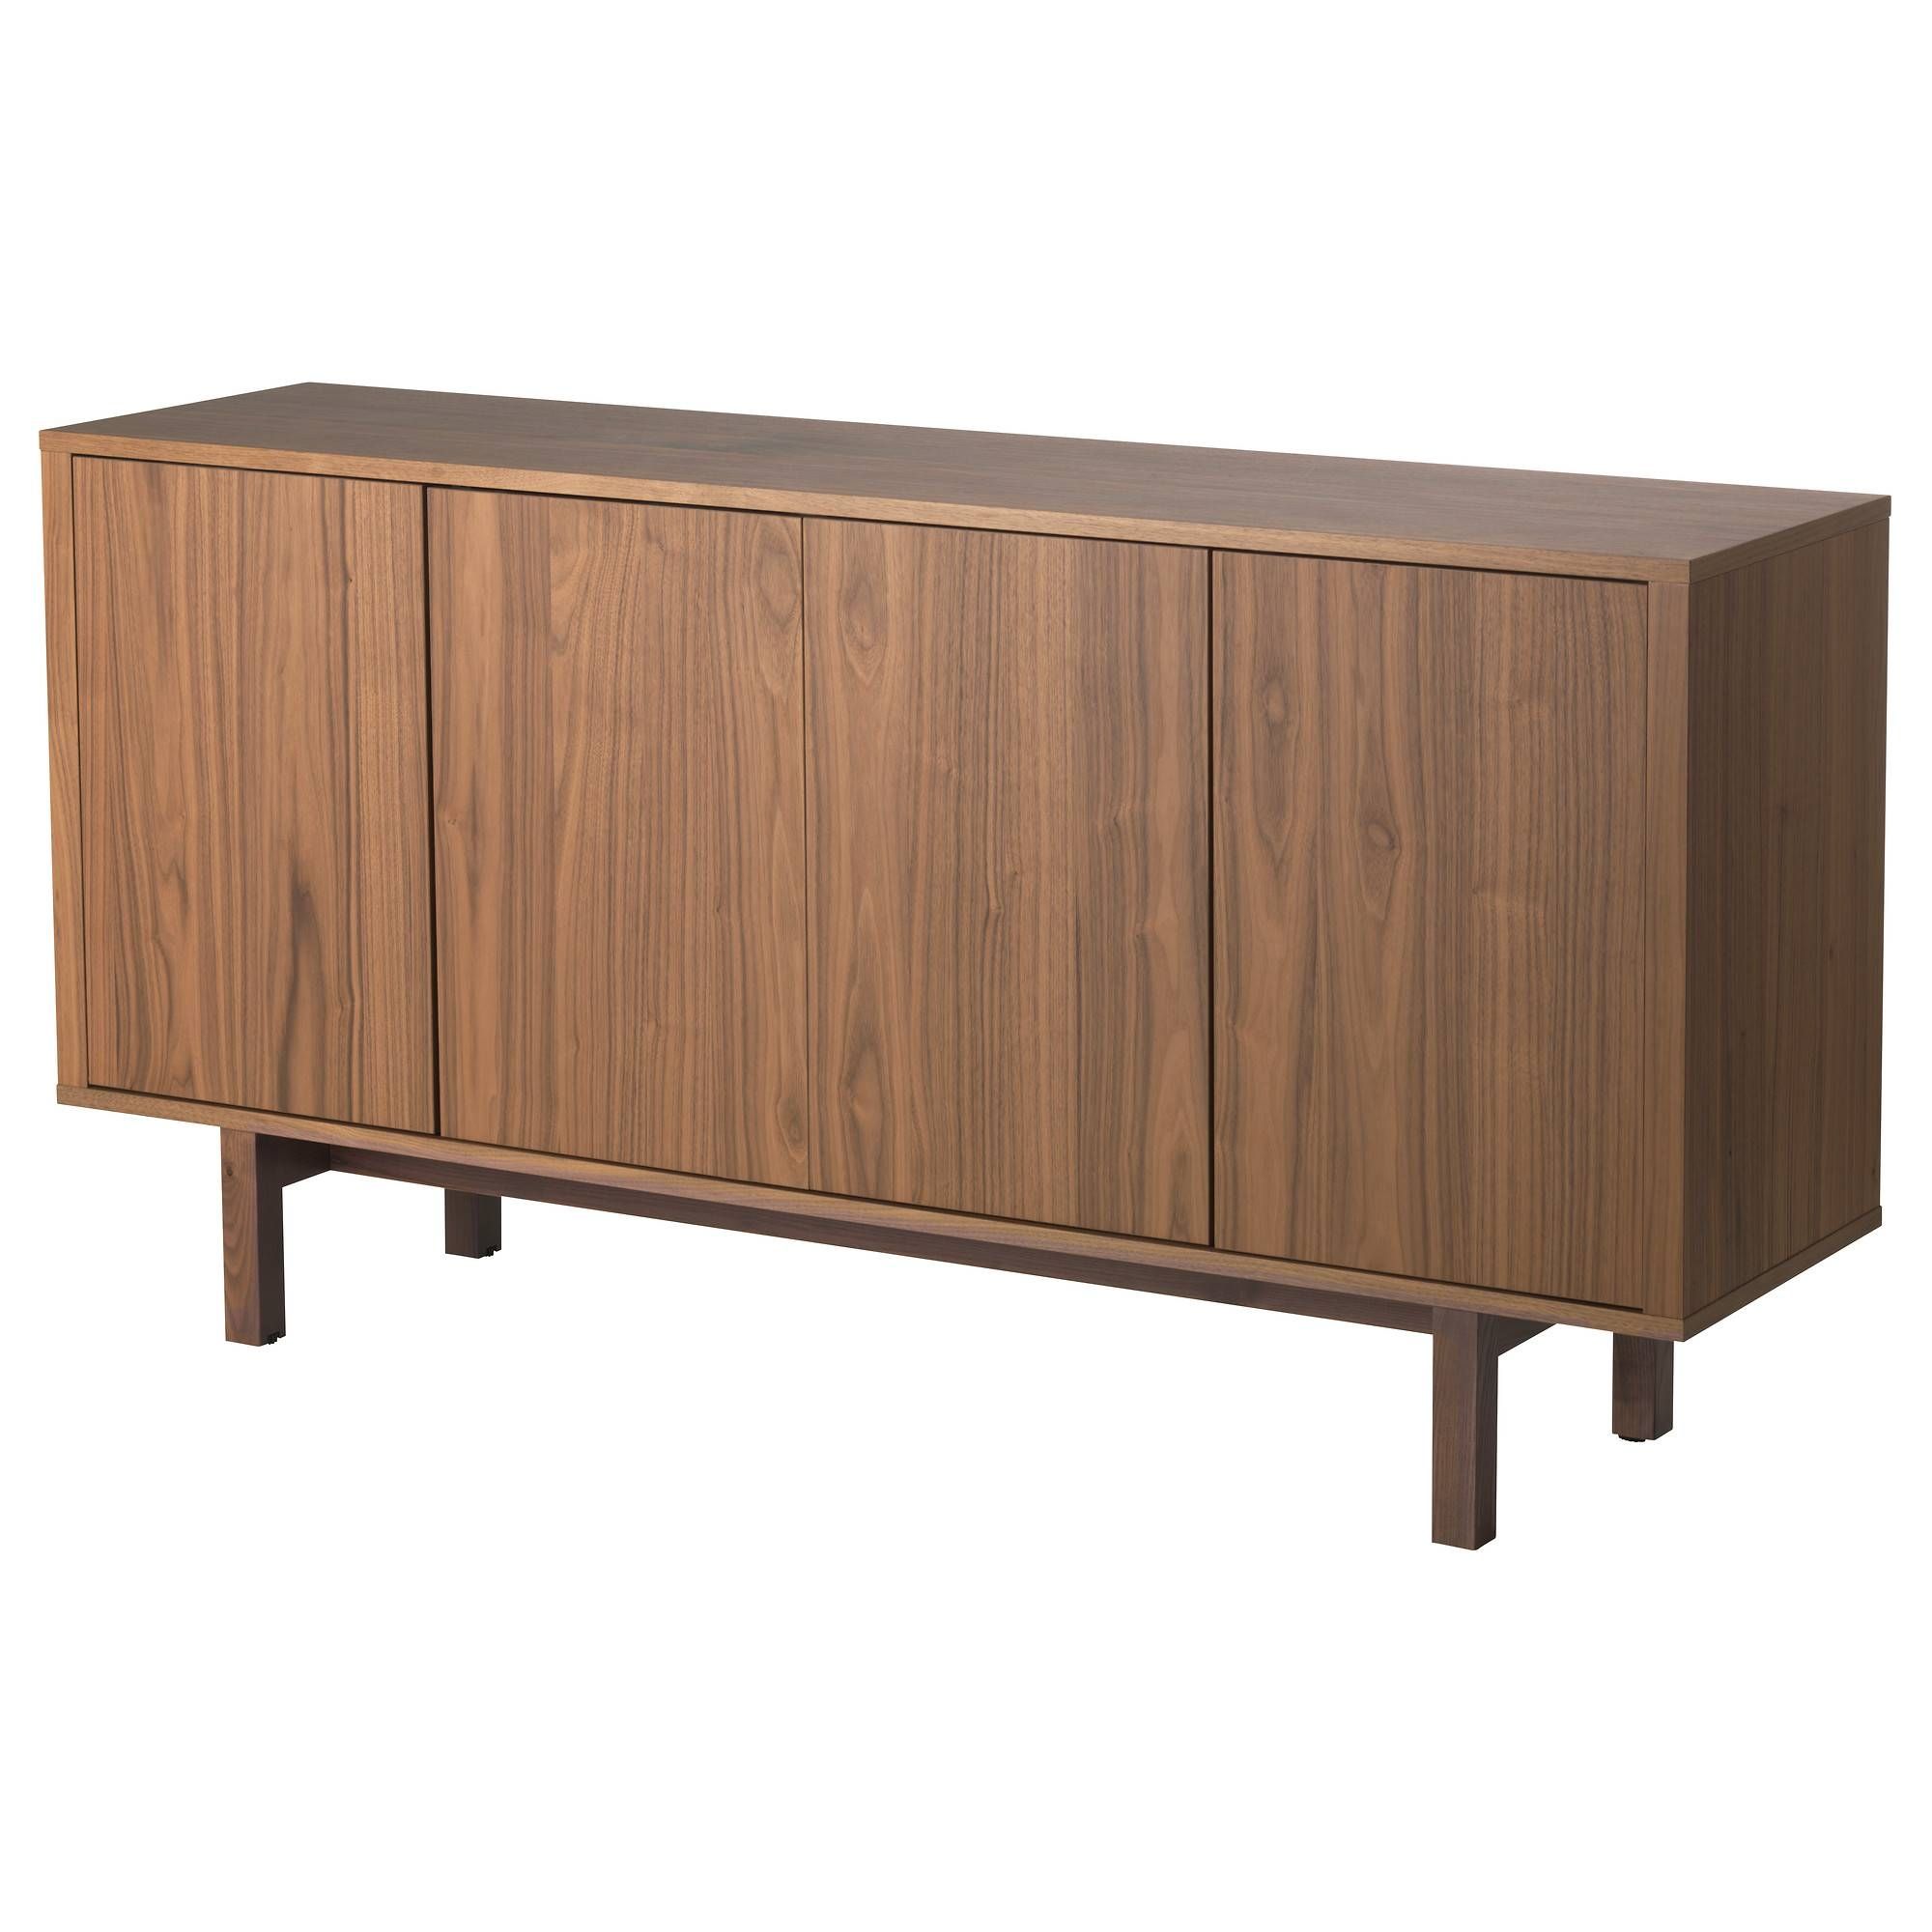 Buffet Tables & Sideboards – Ikea Throughout Most Up To Date Cheap Sideboards (View 10 of 15)